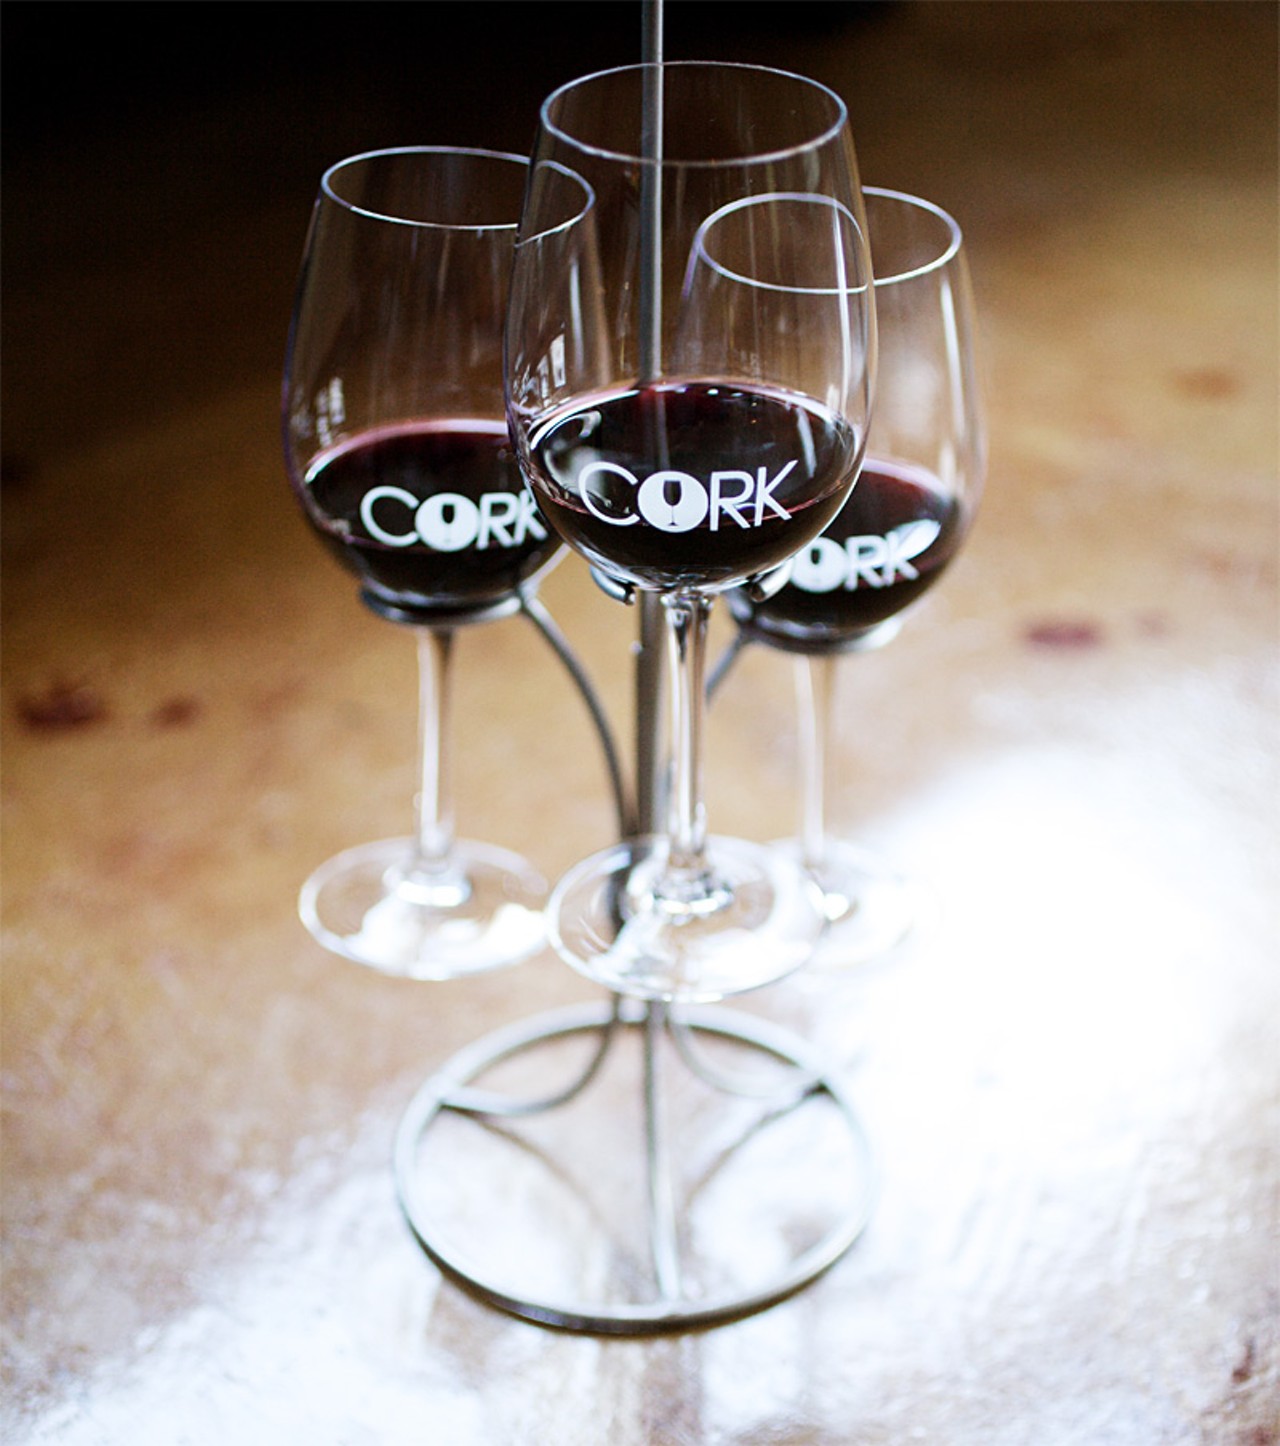 A flight of full-bodied reds offered at Cork Wine Bar. They are 14 Hands Cabernet Sauvignon (a 2007 from Washington), Sterling Vintner's Collection Meritage (a 2007 Central California Coast) and Navarro Malbec (a 2008 from Mendoza, Argentina).